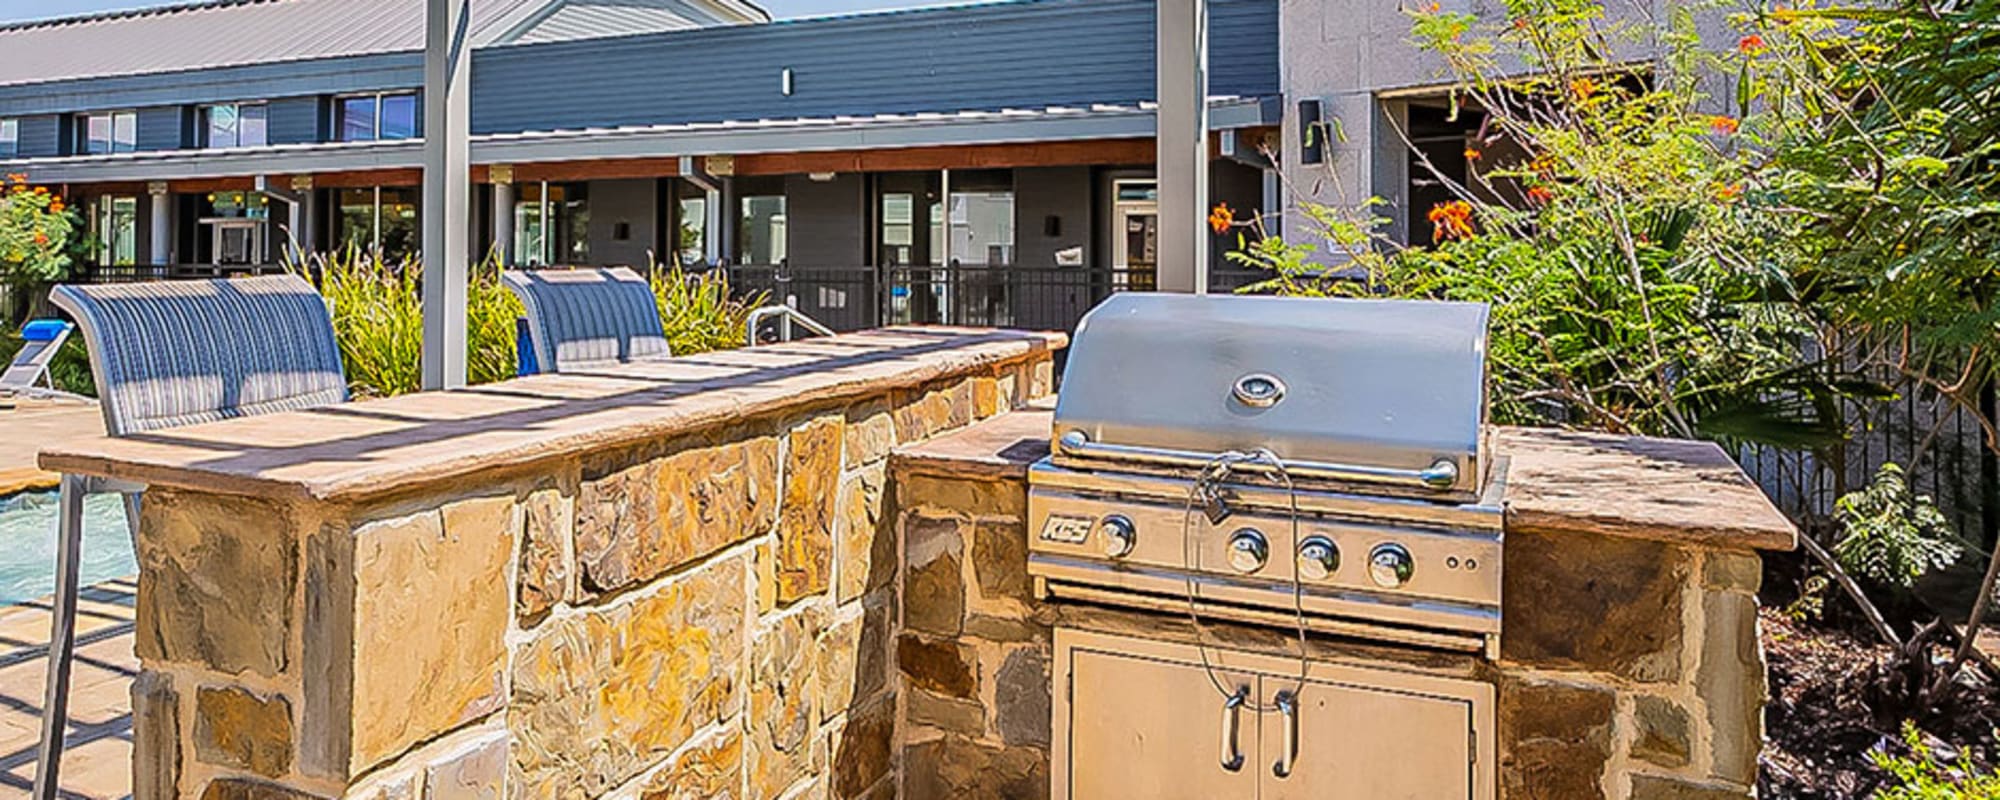 Grilling station at The Landings at Brooks City-Base in San Antonio, Texas